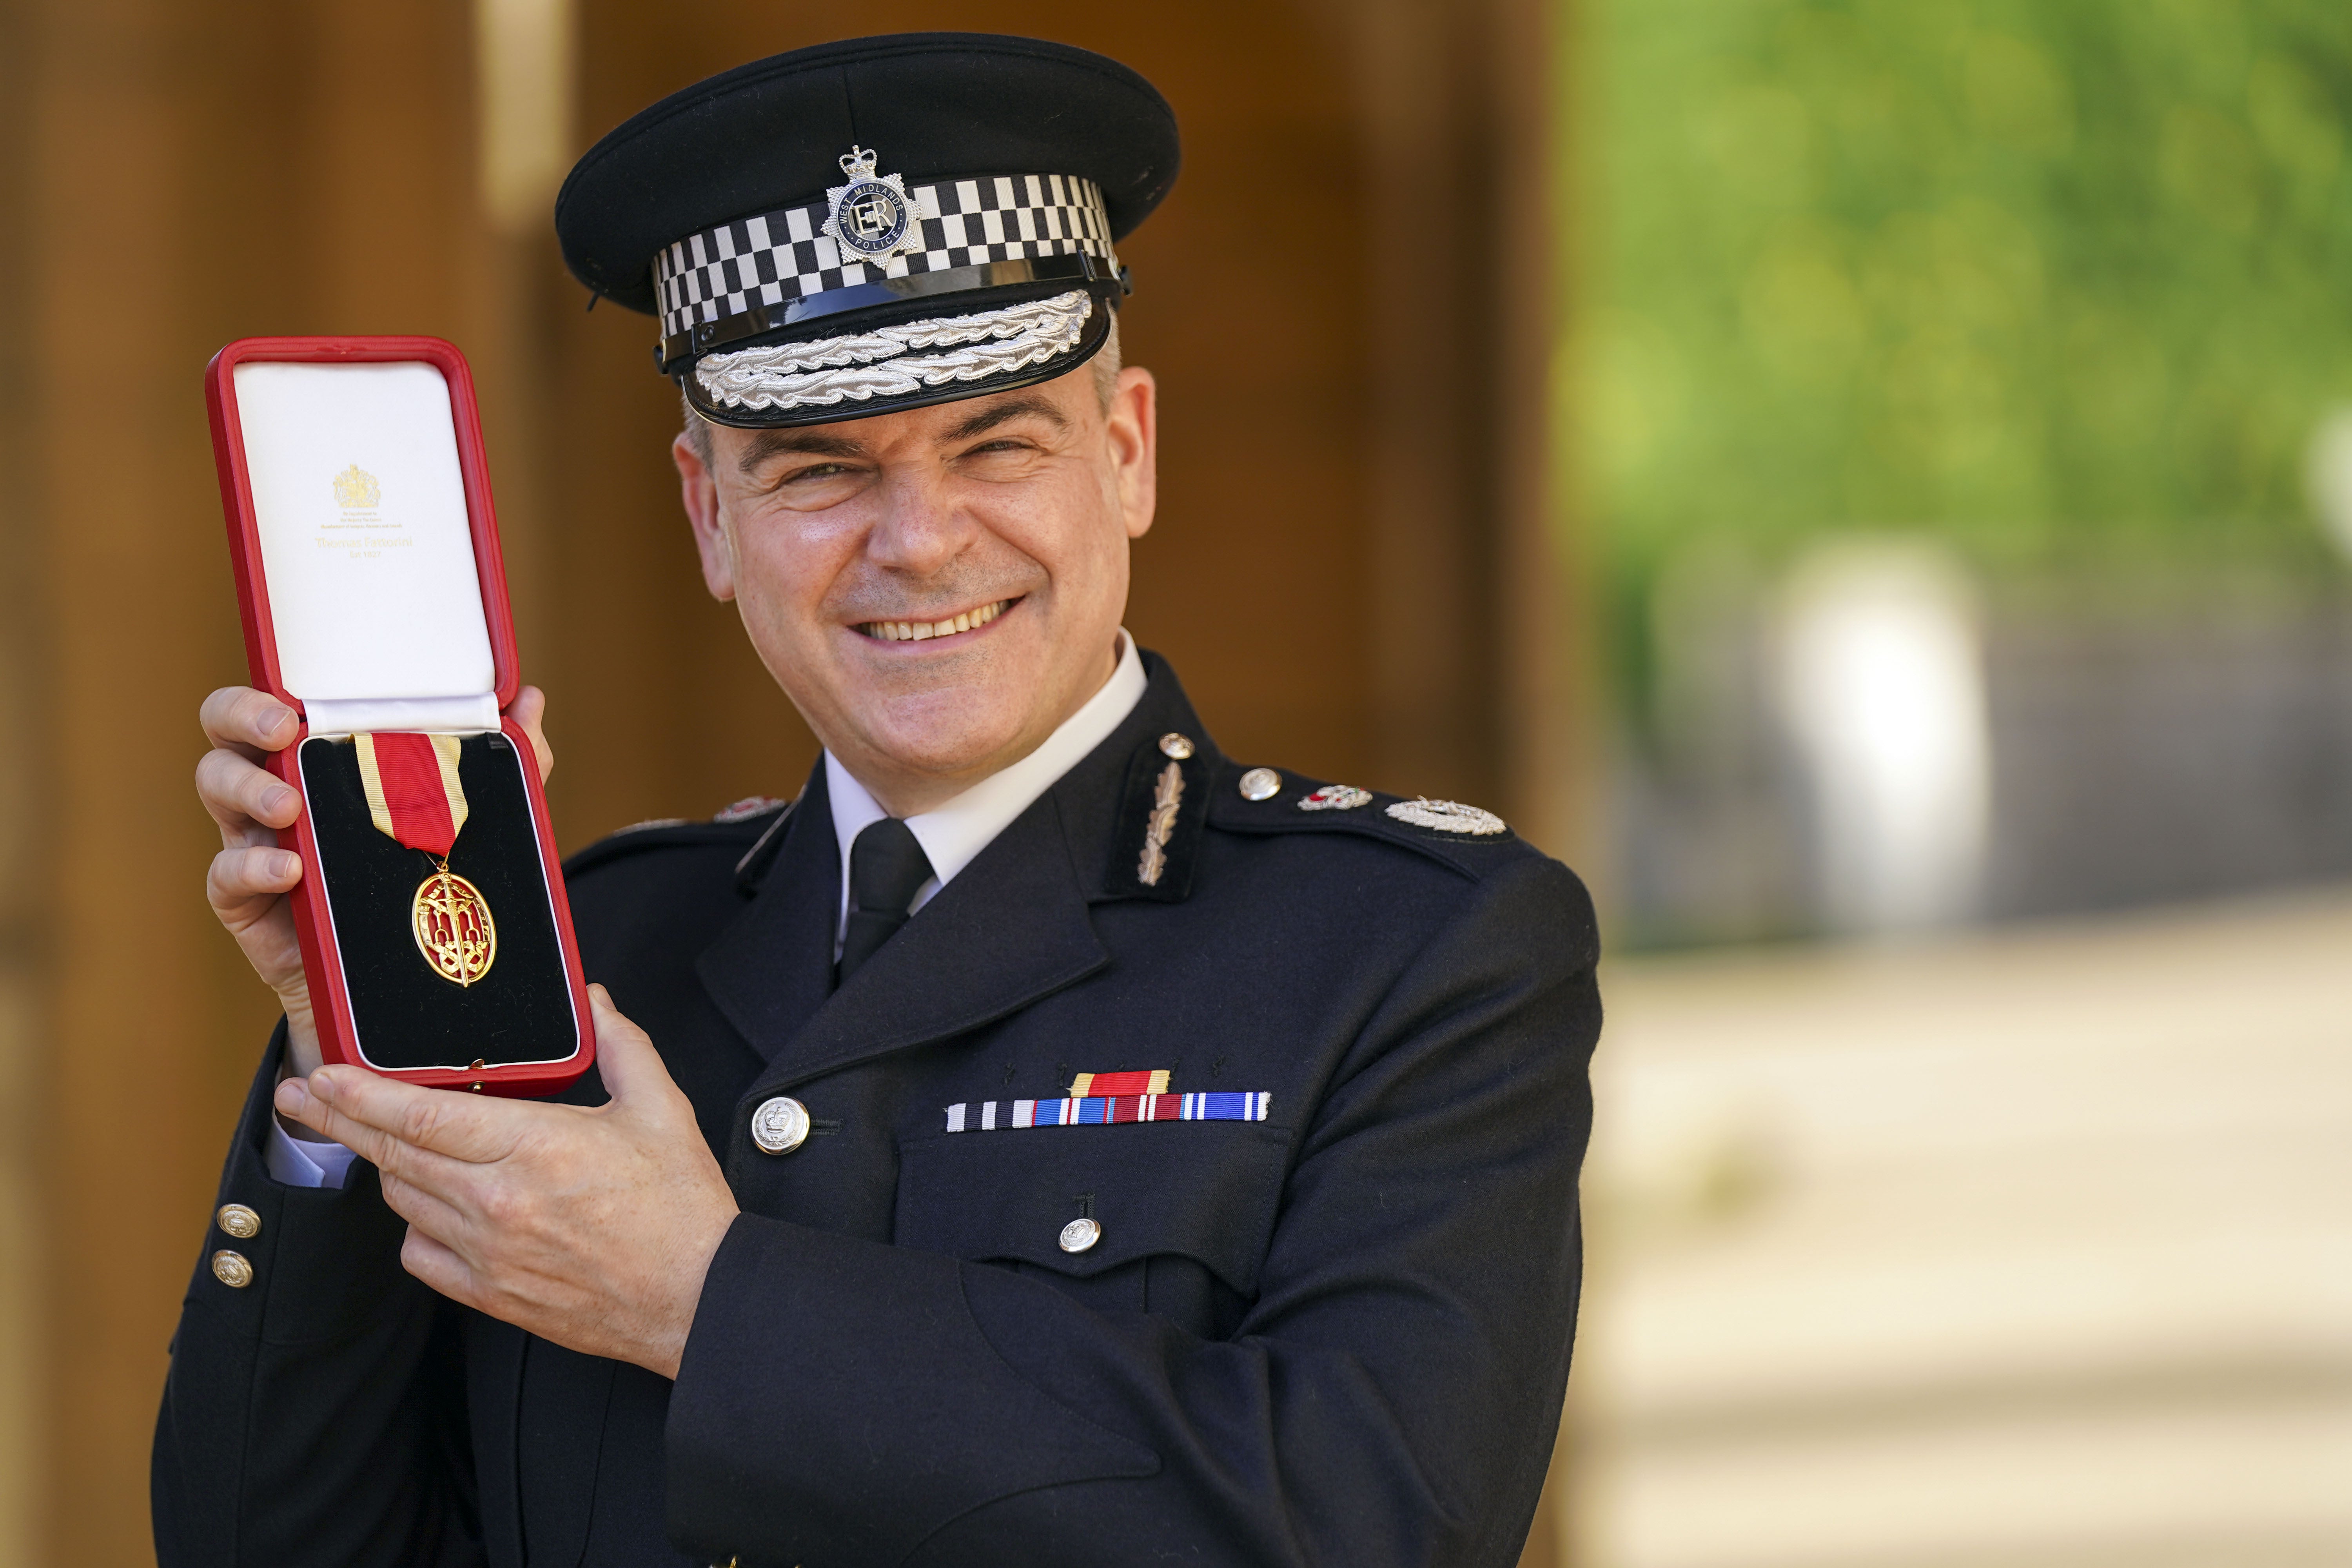 Sir David Thompson, Chief Constable of West Midlands Police, after being made a Knight Bachelor by the Prince of Wales at Windsor Castle (Steve Parsons/PA)